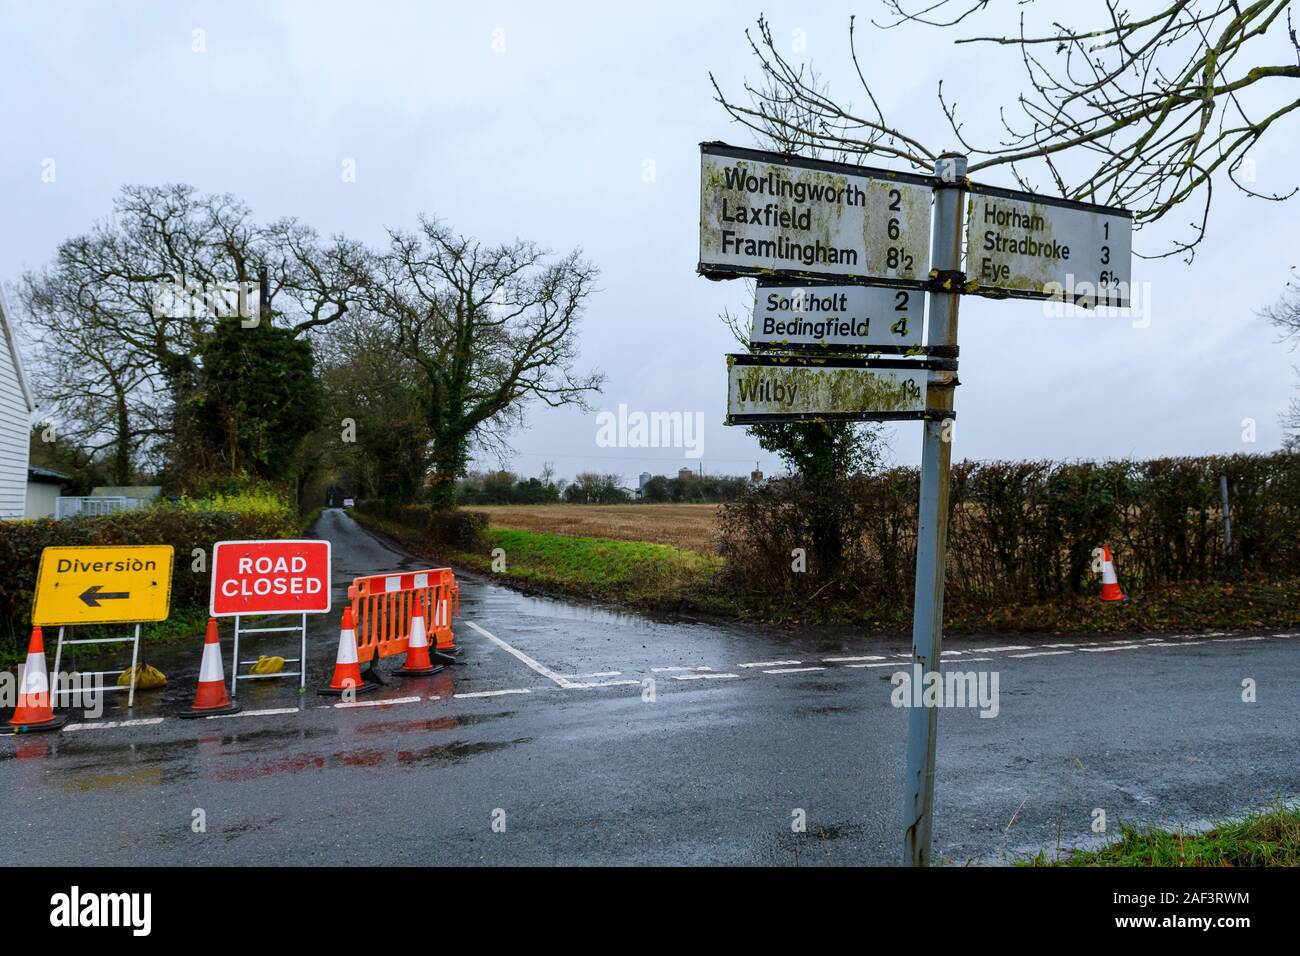 Athelington, England. 12 December, 2019.   The Mid Suffolk farm in Athelington which has been confirmed as having a Avian Influenza (Bird Flu) outbreak    The low pathogenic avian flu of the H5 strain was originally confirmed at the commercial chicken farm, on Tuesday 10th December.  All the birds will now be humanely culled and a 1km restriction zone has been put in place around the infected farm to limit the risk of the disease spreading.   Credit: Mark Bullimore/Mark Bullimore/Alamy Live News Stock Photo